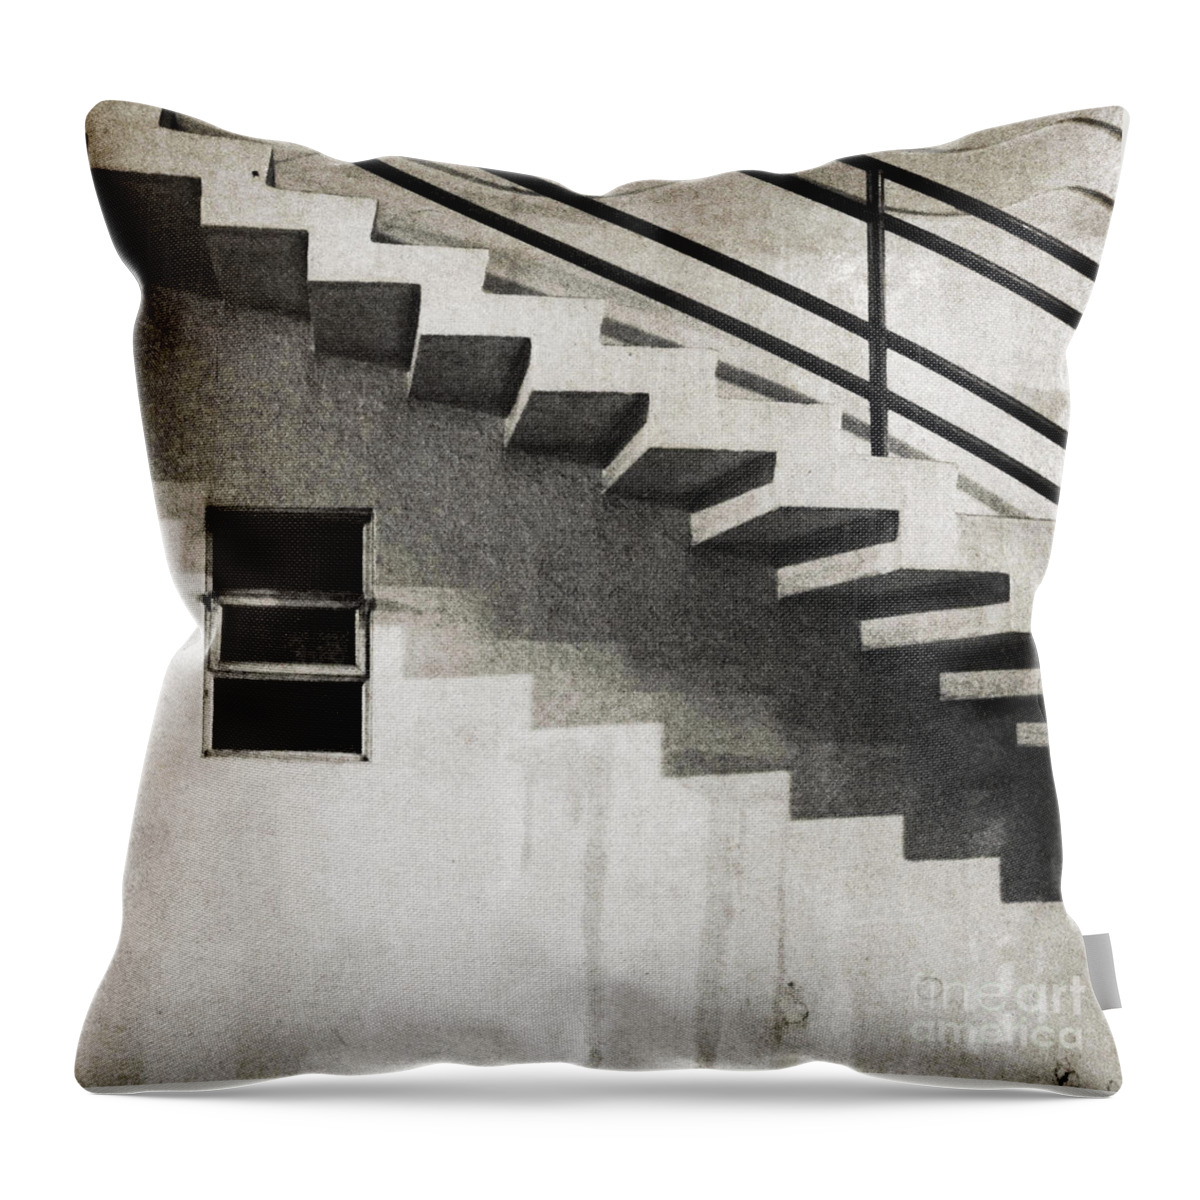 Window Throw Pillow featuring the photograph Secret Passage by Linda Woods